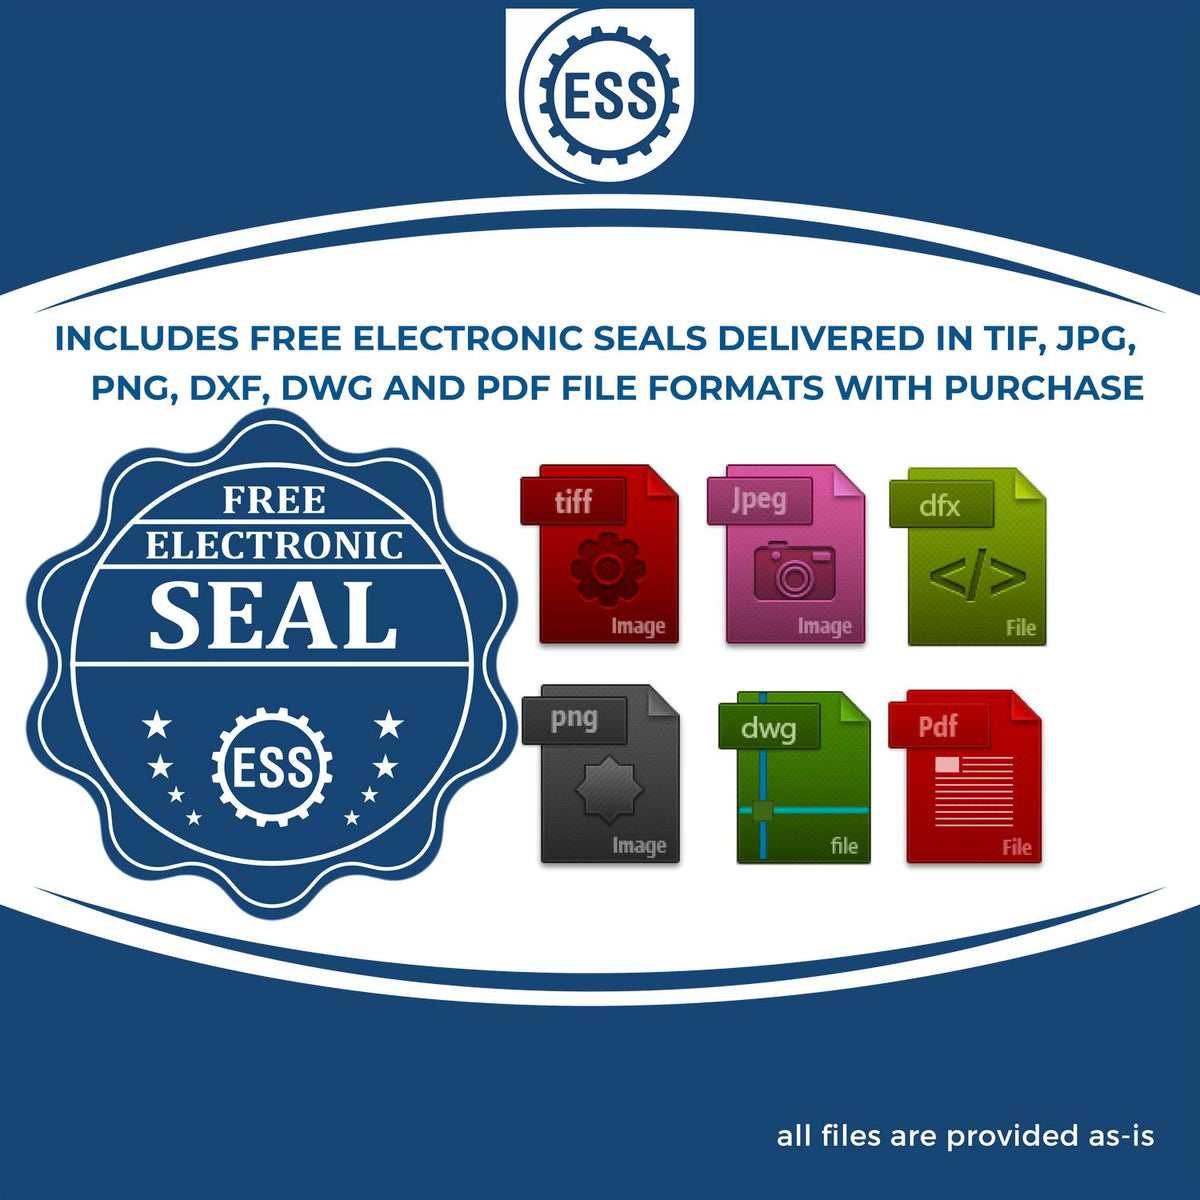 An infographic for the free electronic seal for the Handheld Alabama Land Surveyor Seal illustrating the different file type icons such as DXF, DWG, TIF, JPG and PNG.